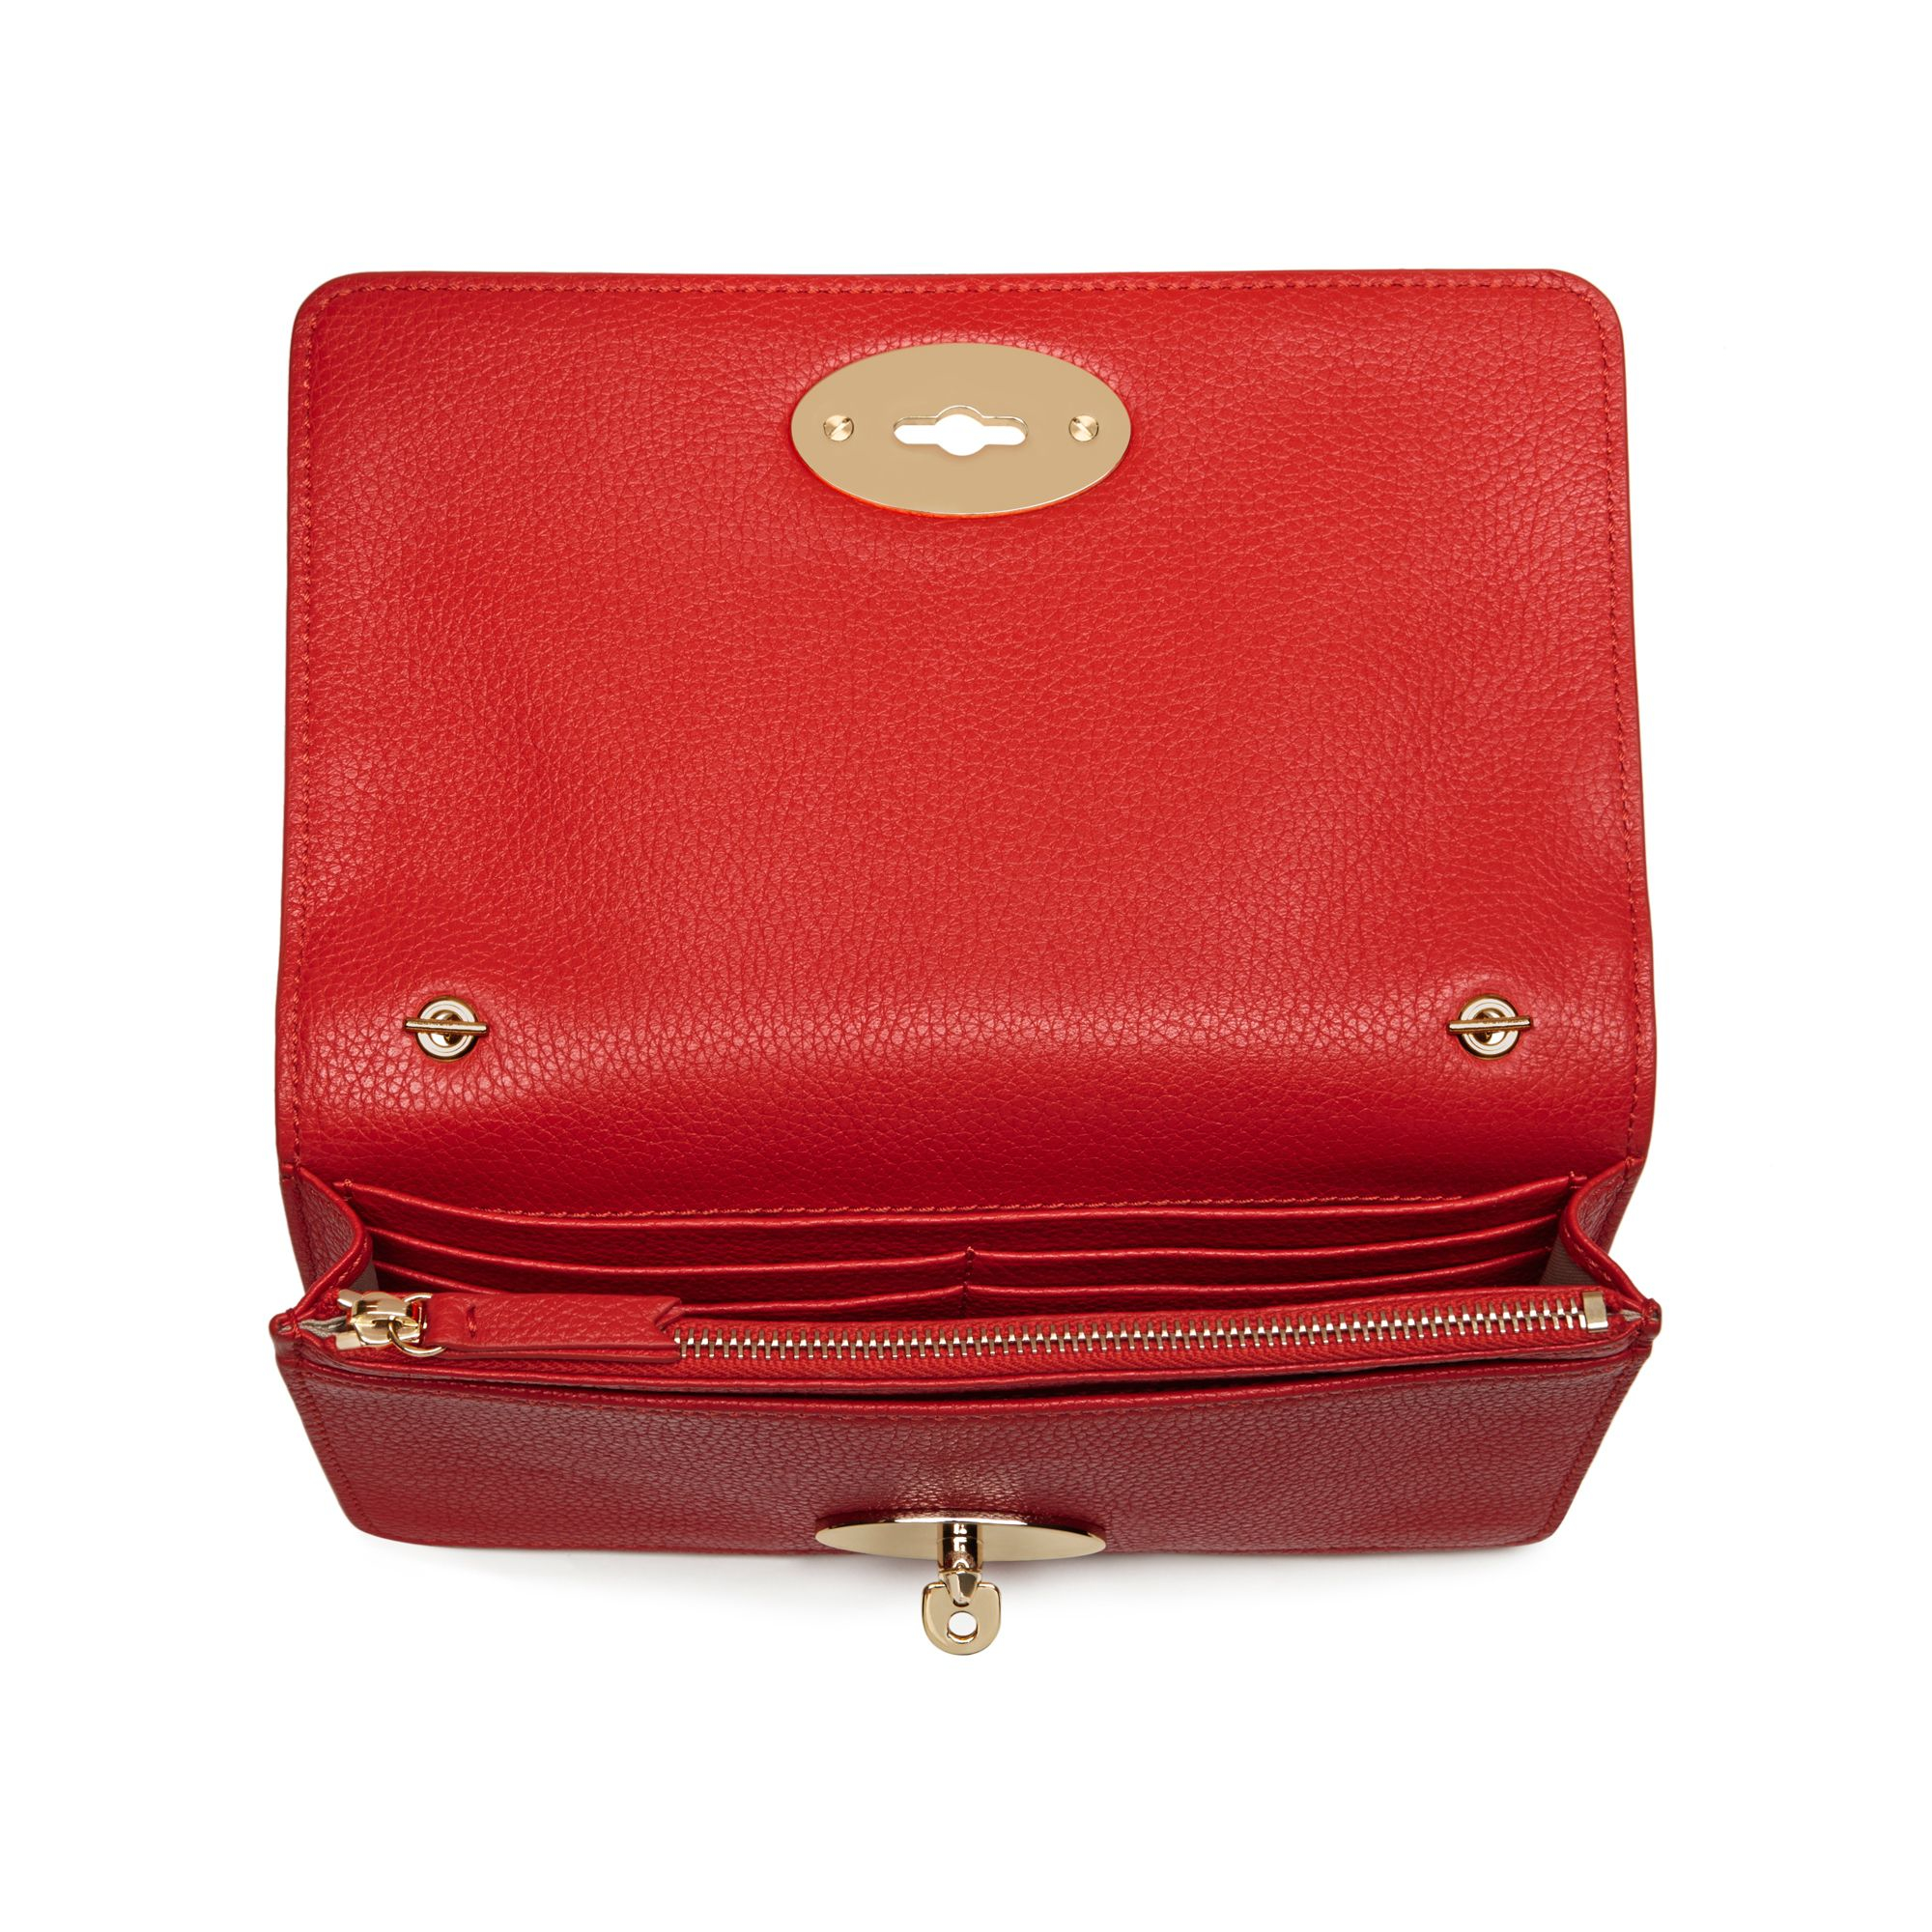 Mulberry Canvas Bayswater Clutch Wallet in Red - Lyst